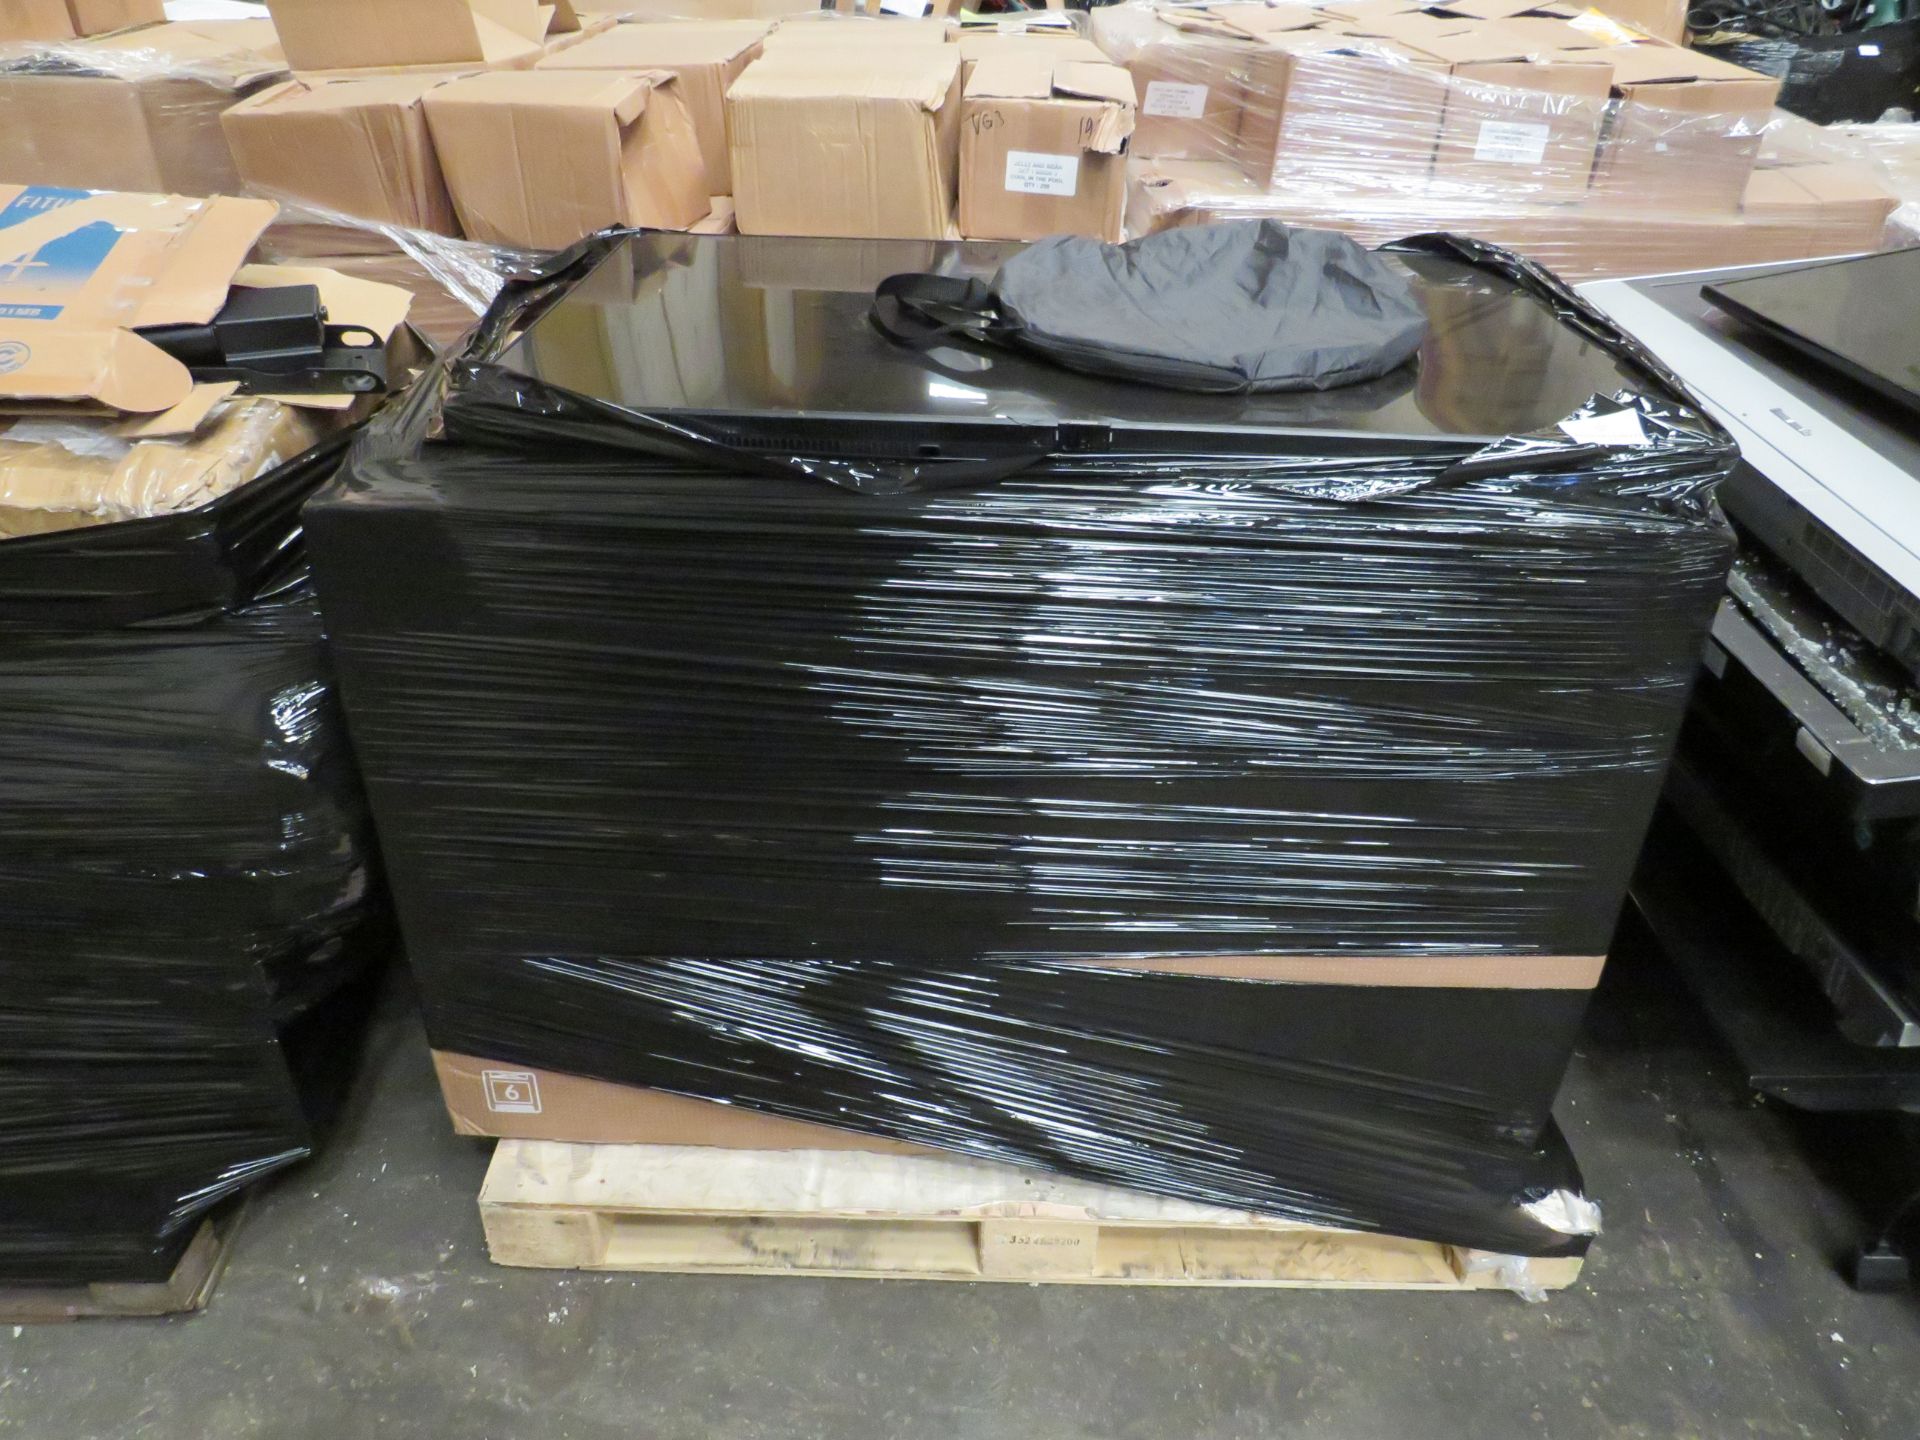 Pallet Containing 7 Smashed Samsung Tvs 50" - 65" - All Have Damages Present, Viewing Recommended